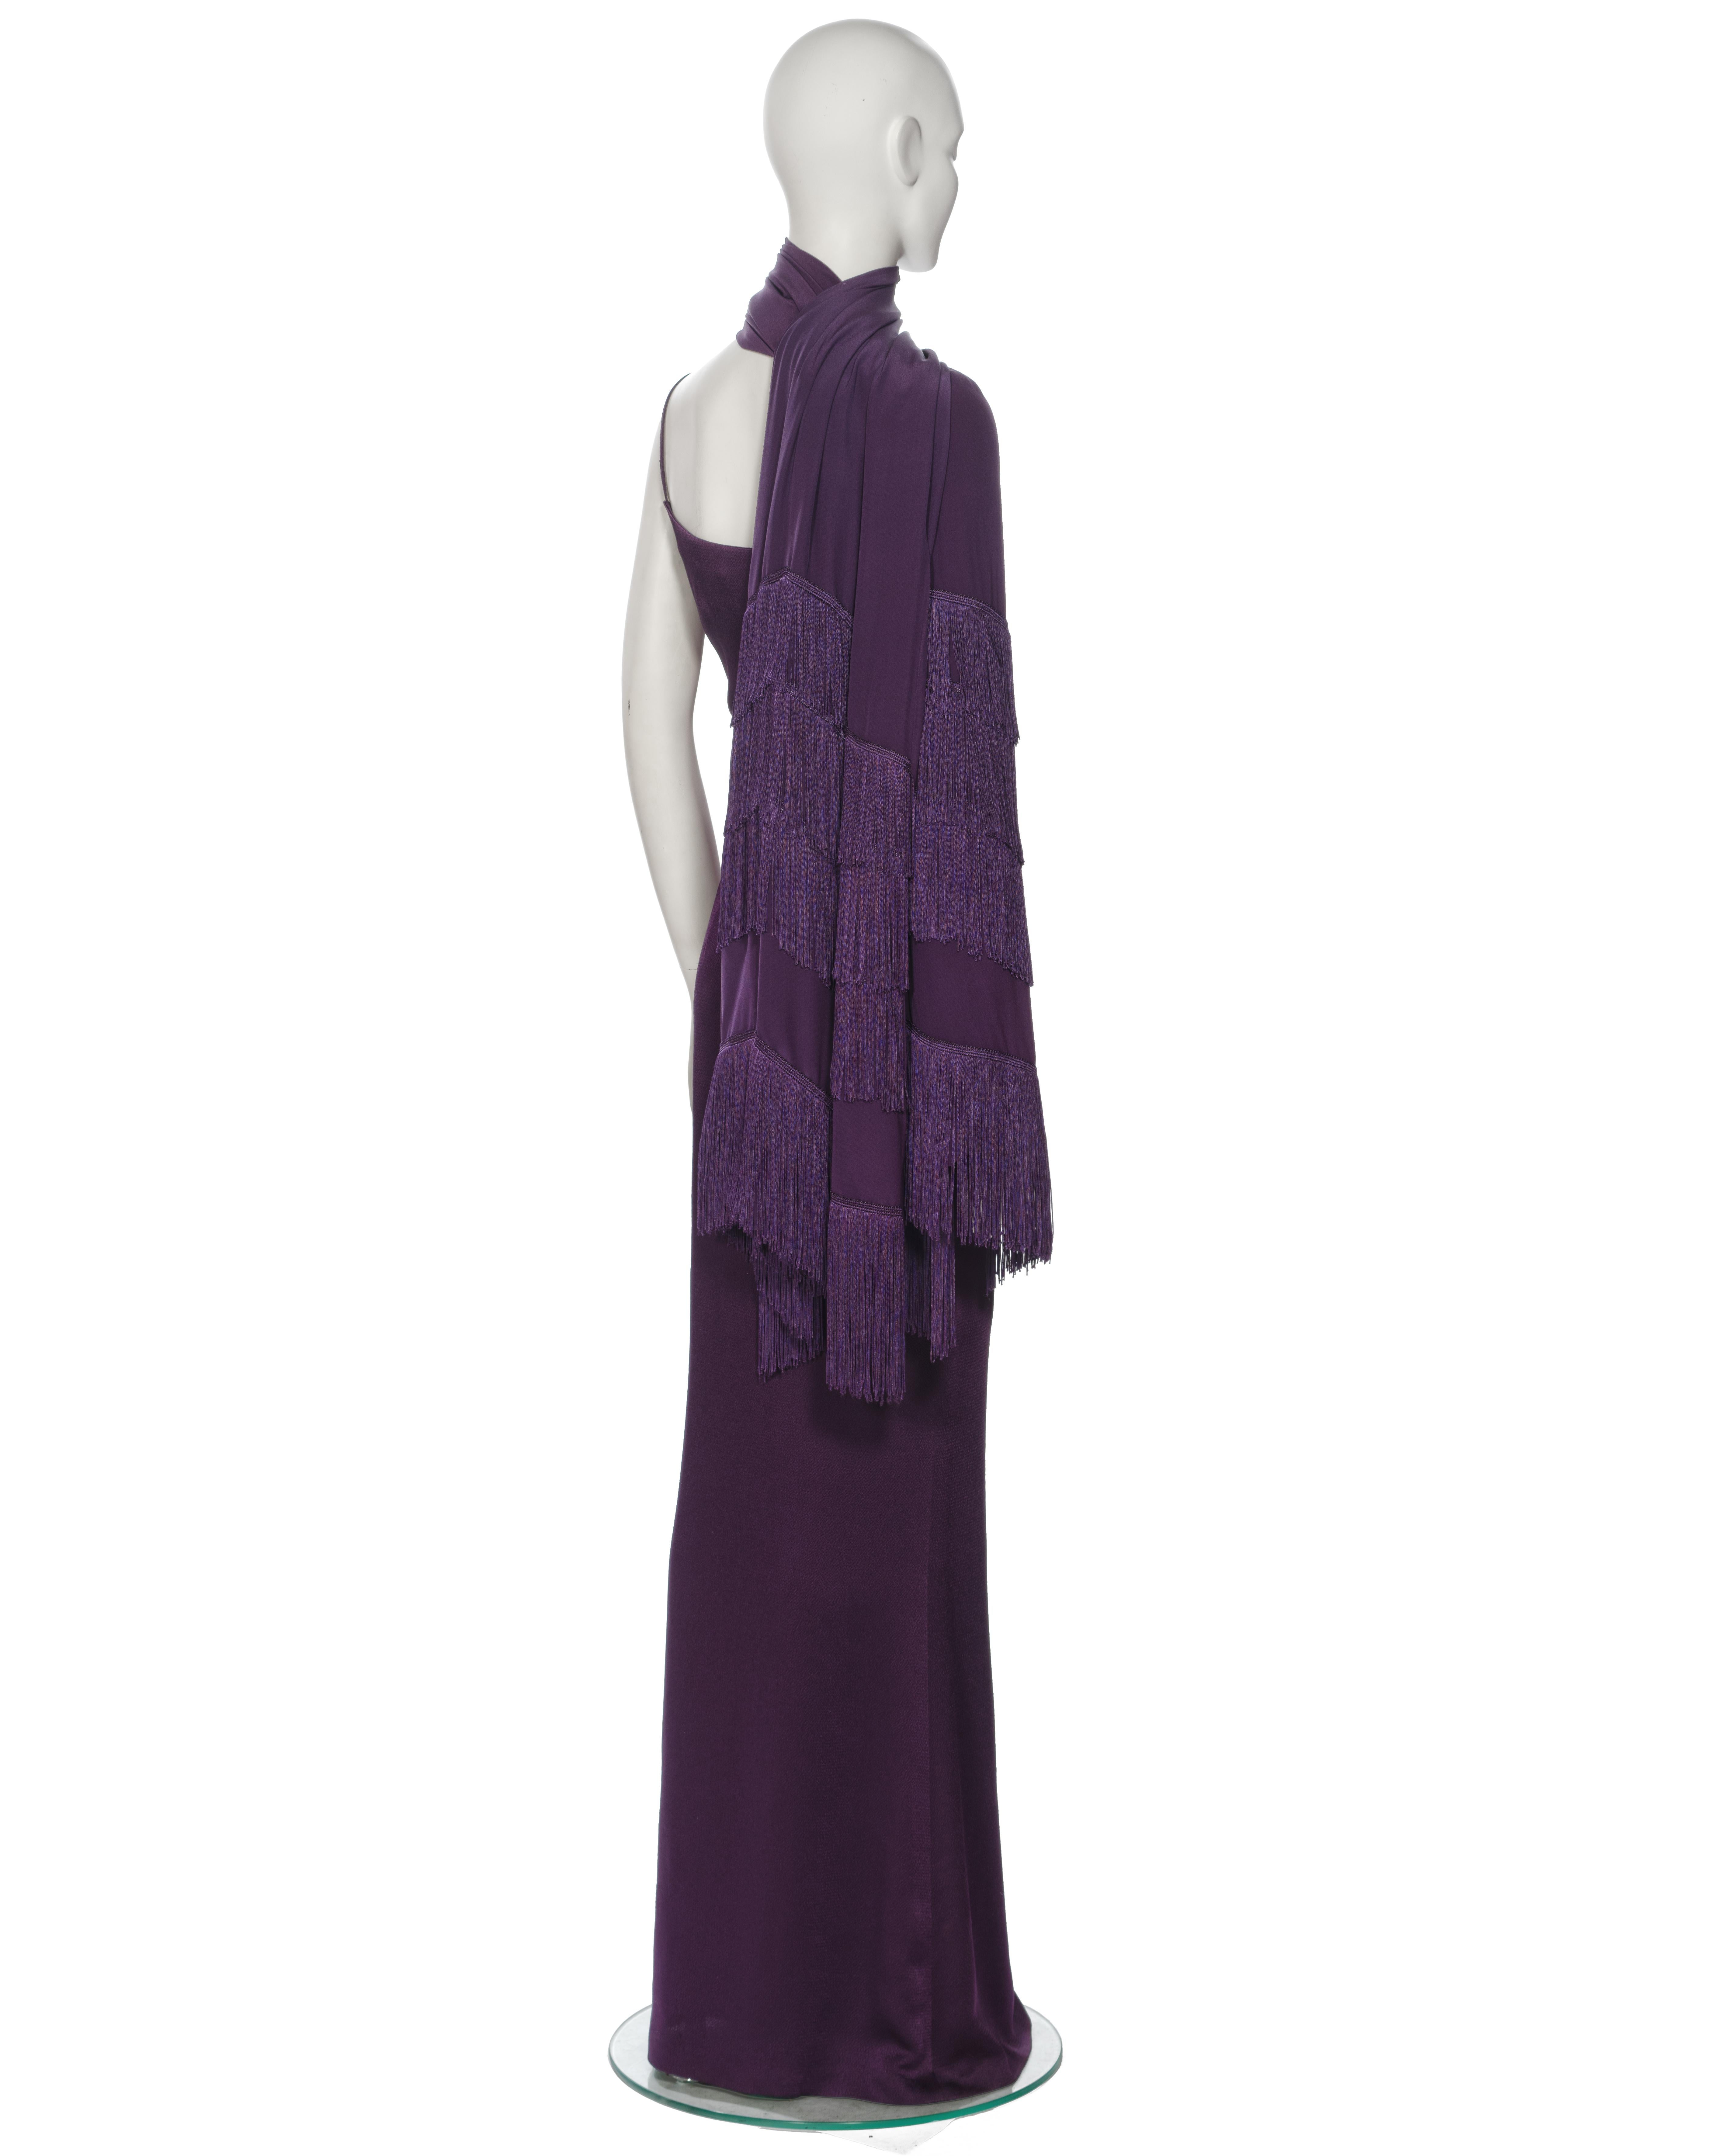 Christian Dior by John Galliano Purple Satin Evening Dress and Shawl, ss 1998 For Sale 4